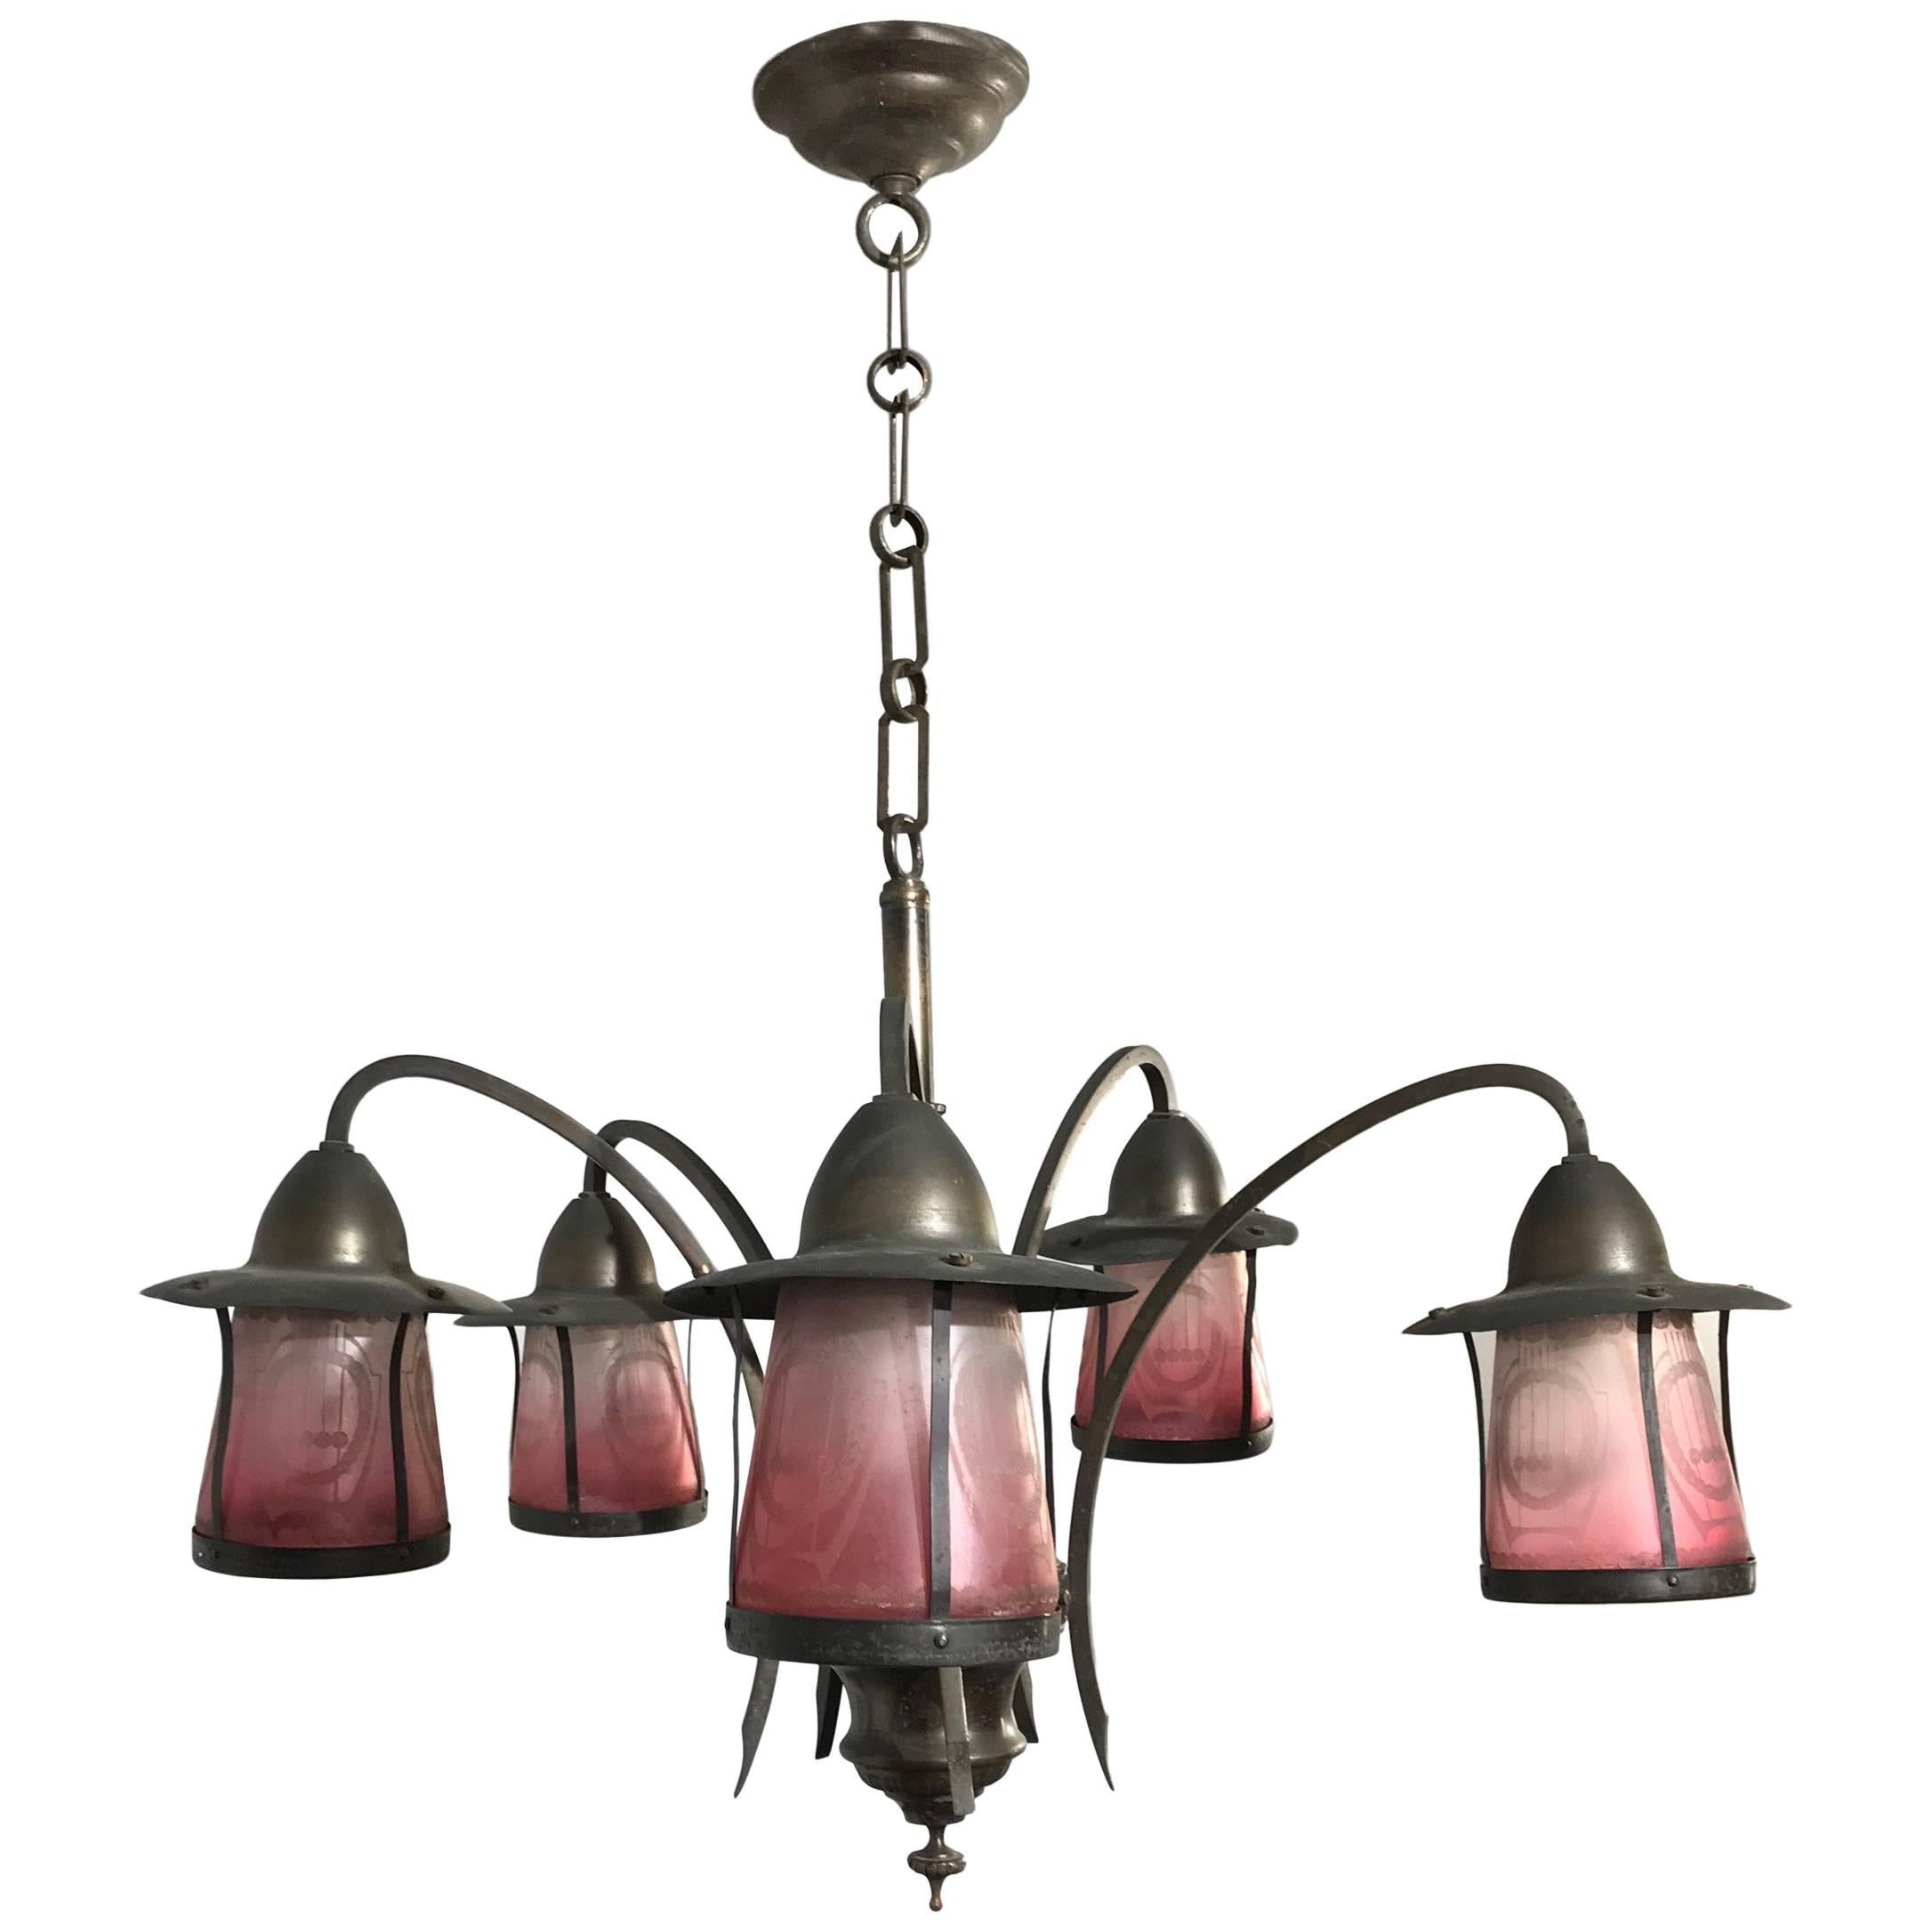 Unique Arts an Crafts Brass Pendant Light with Acid Etched Color Glass Shades For Sale